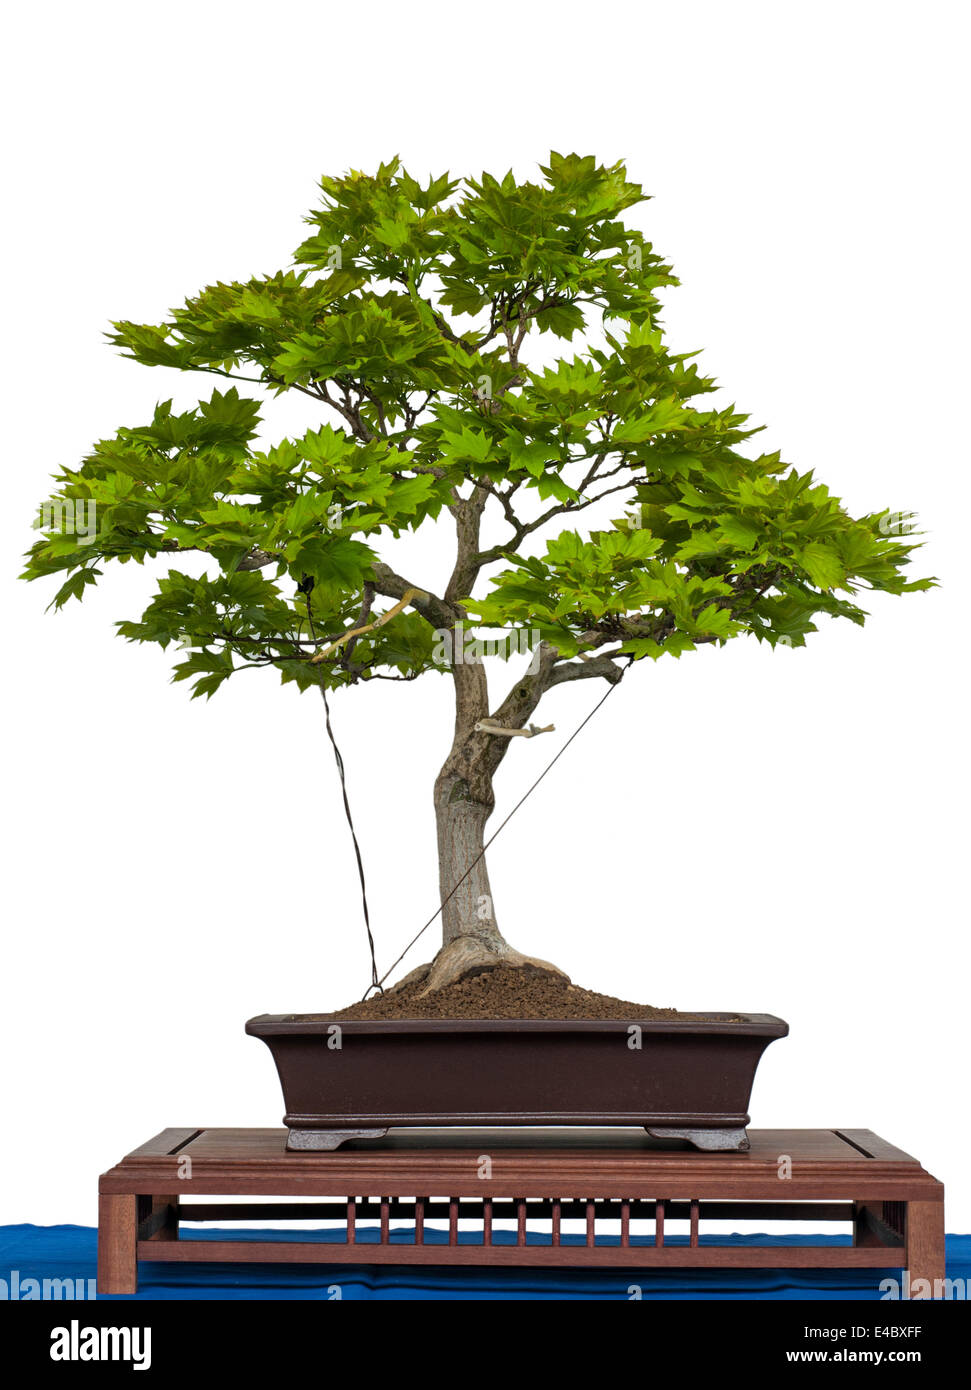 Deciduous Bonsai Tree High Resolution Stock Photography and Images - Alamy